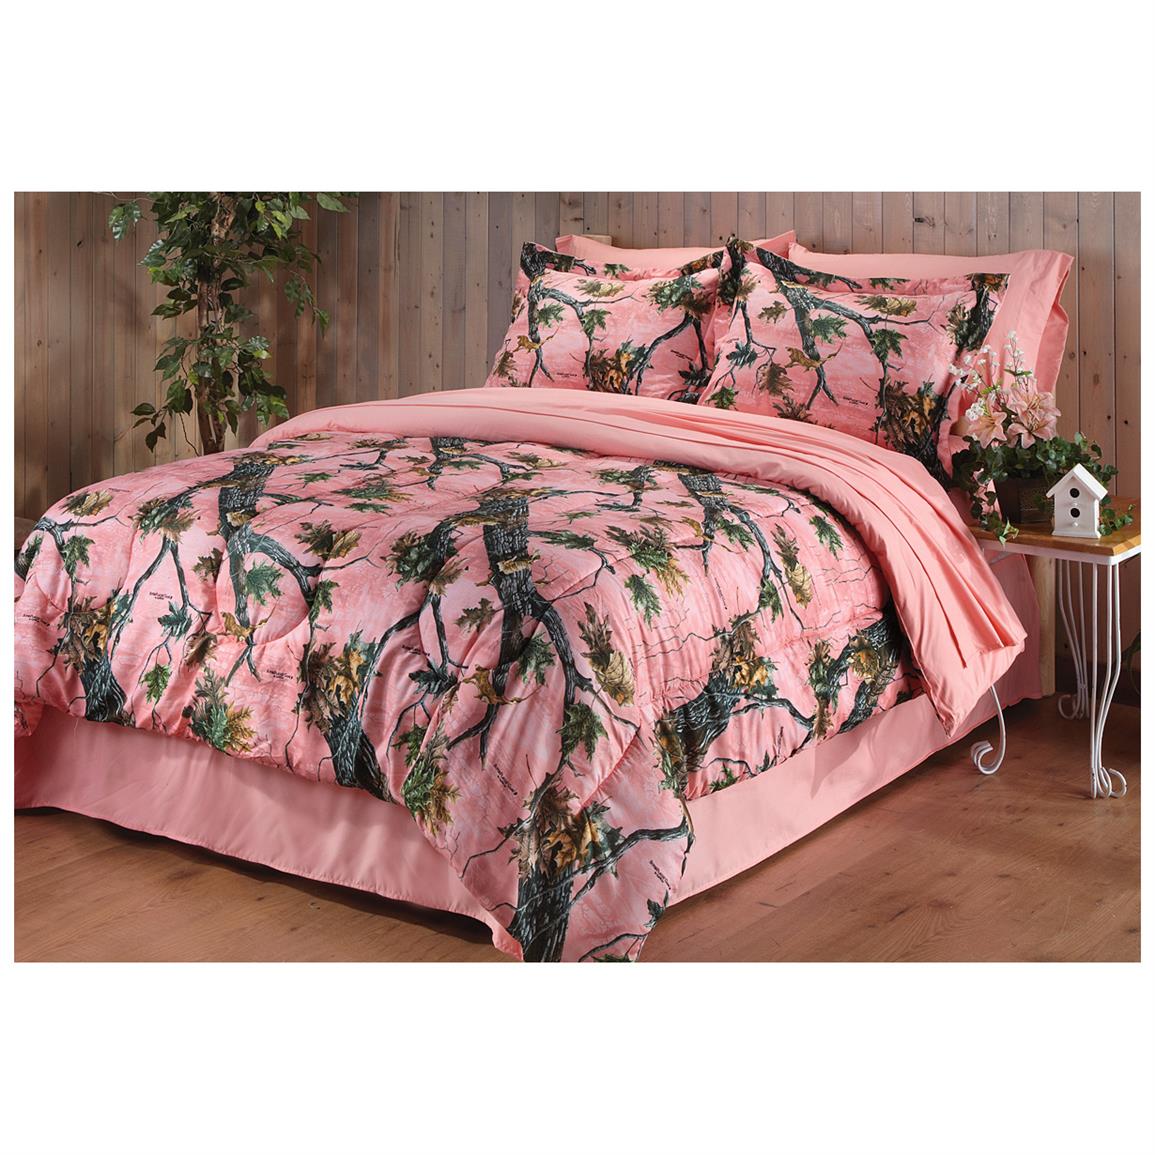 Superflauge Pink Complete Bed Set, Twin Size Pink Camo Bedding